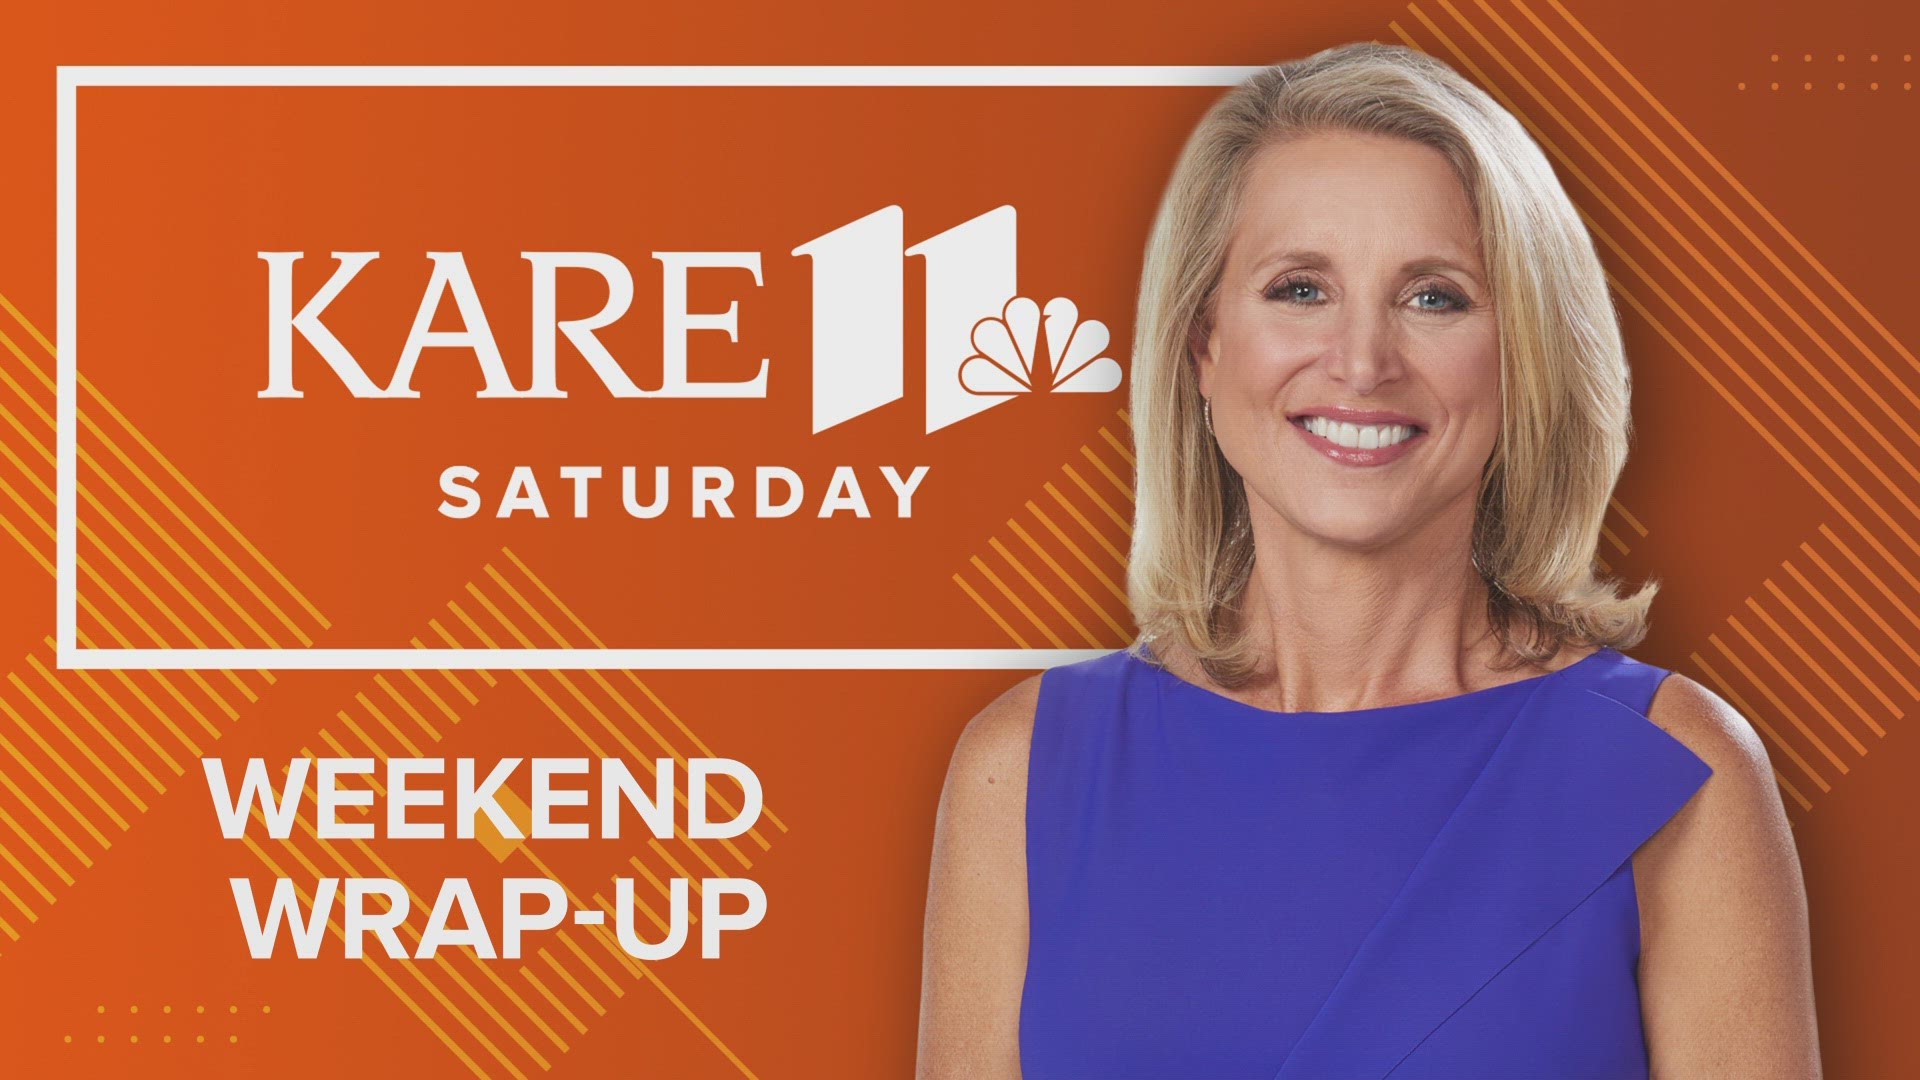 Check out the best segments from the KARE 11 Saturday show on June 3, 2023.